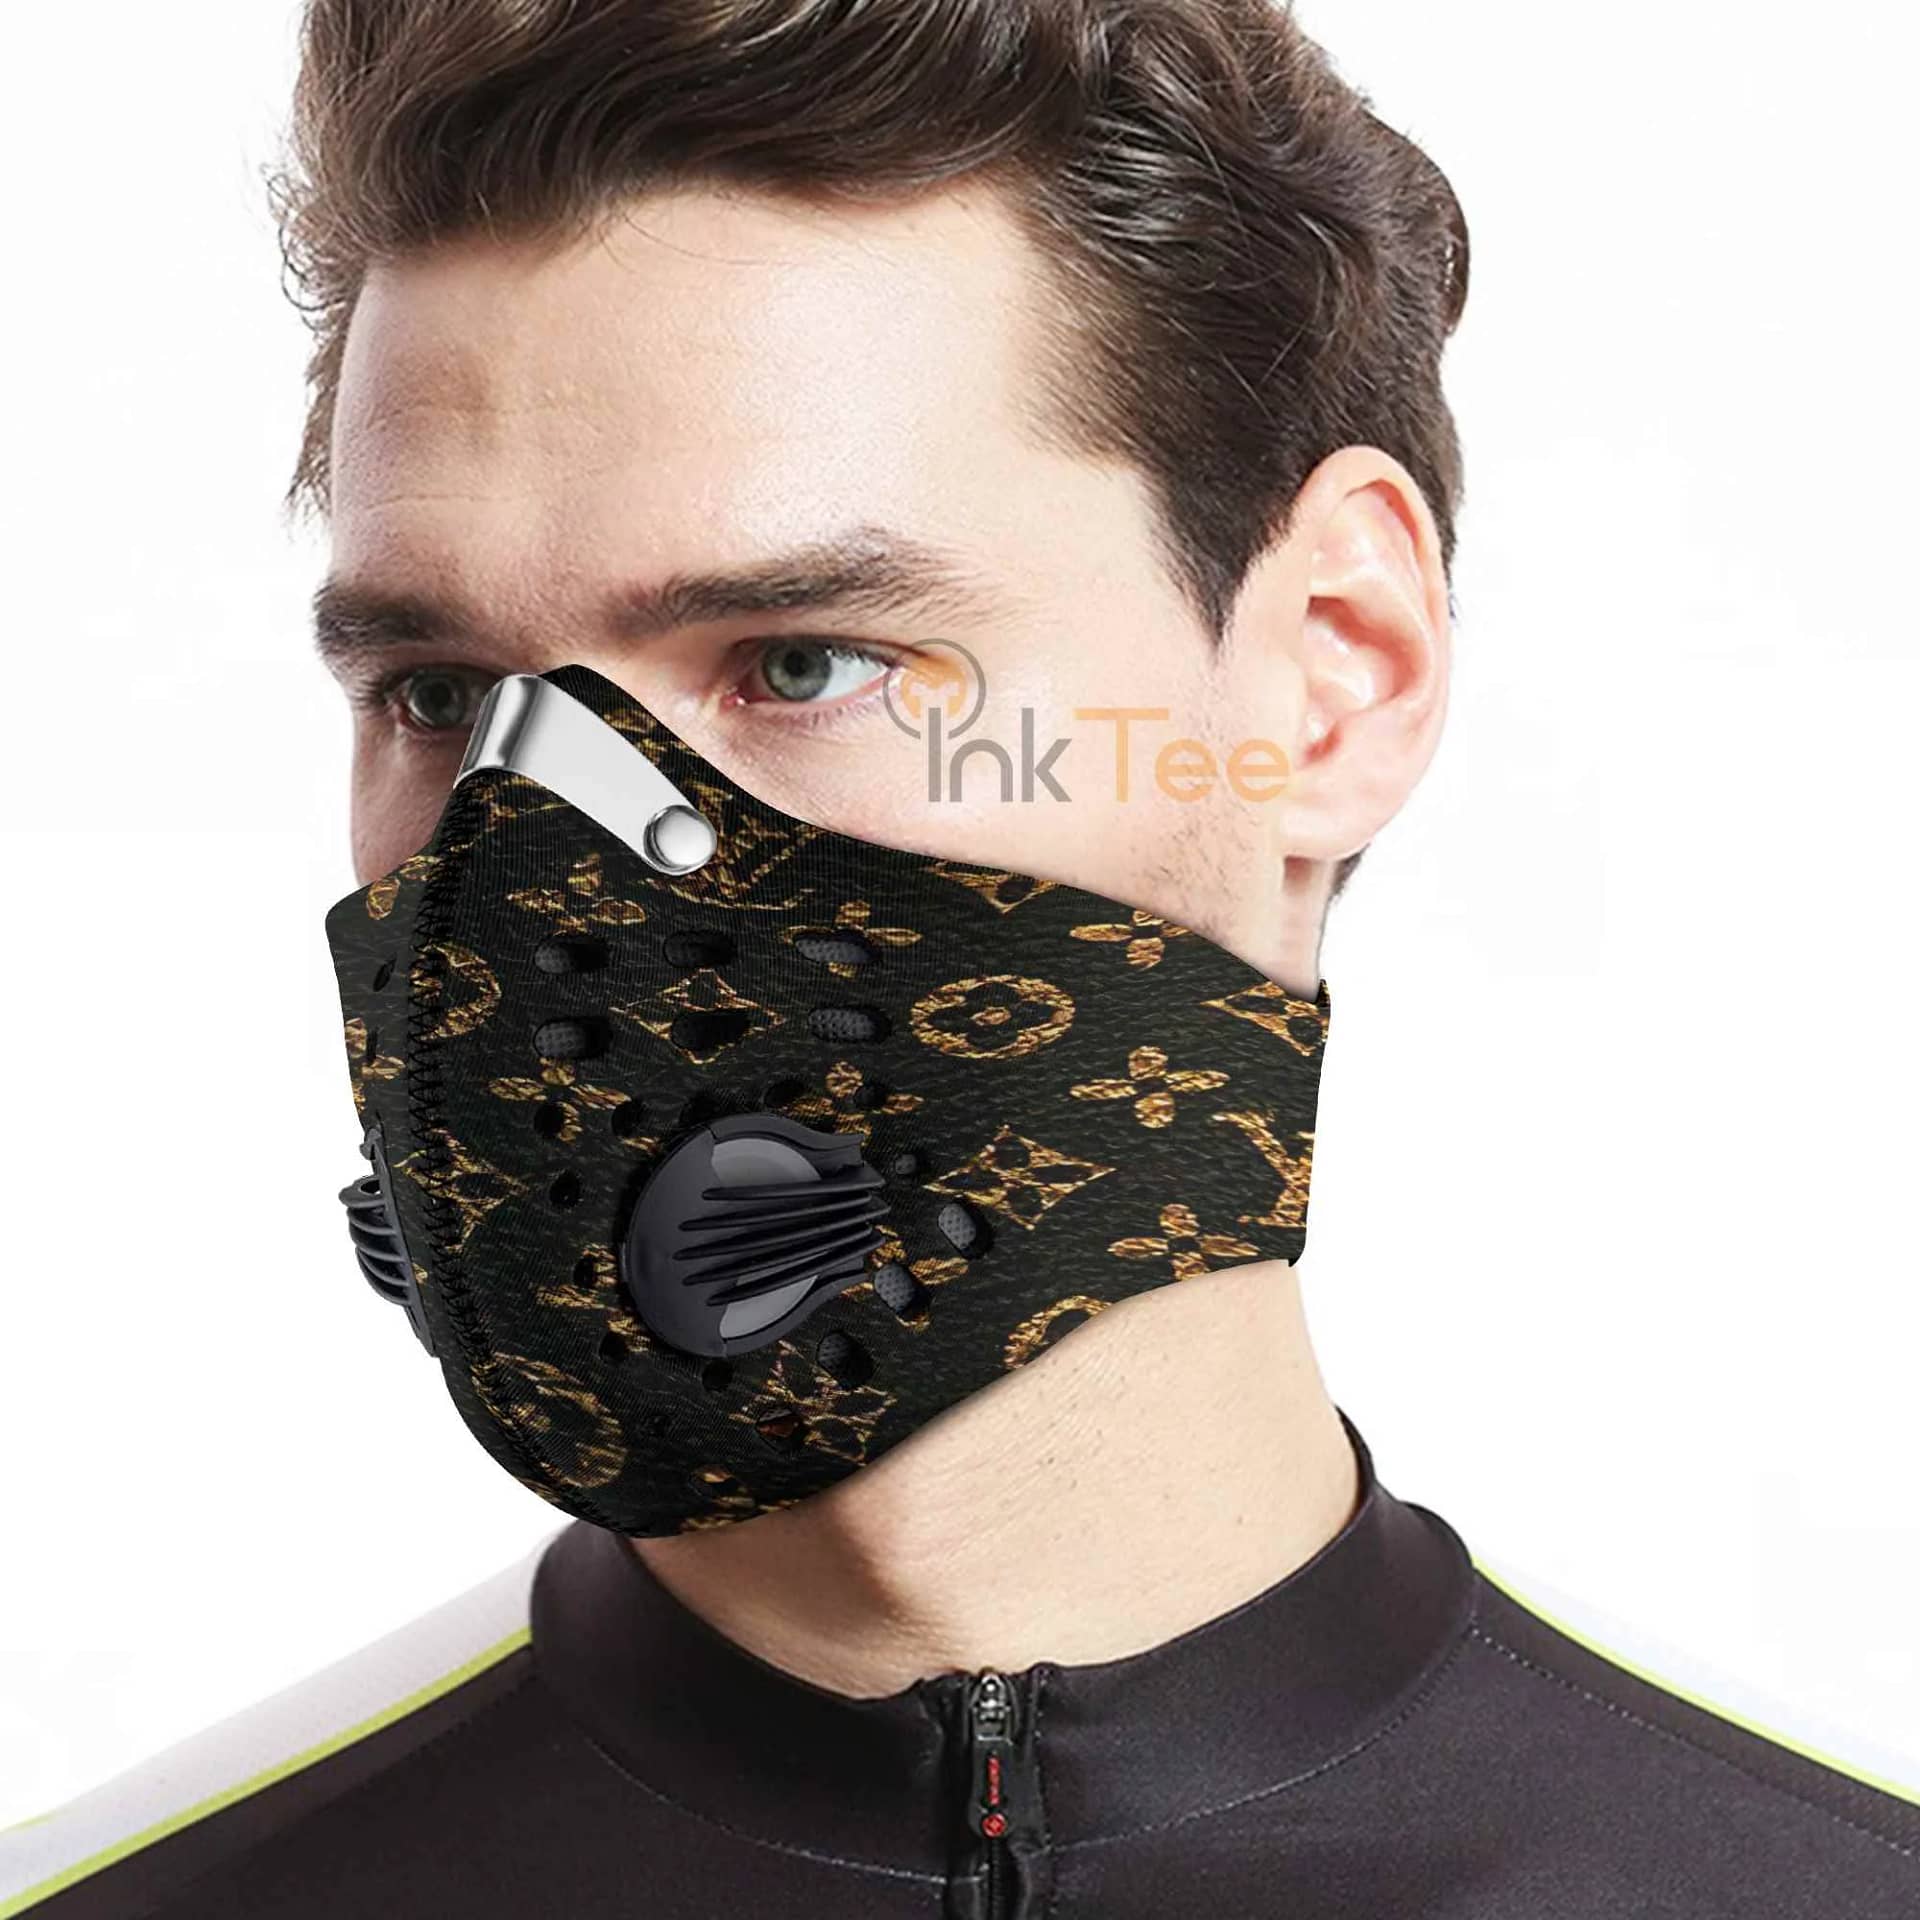 Amazon Best Selling Luis Vuitton Sku 218 Filter Activated Carbon Pm 2.5 Face Mask